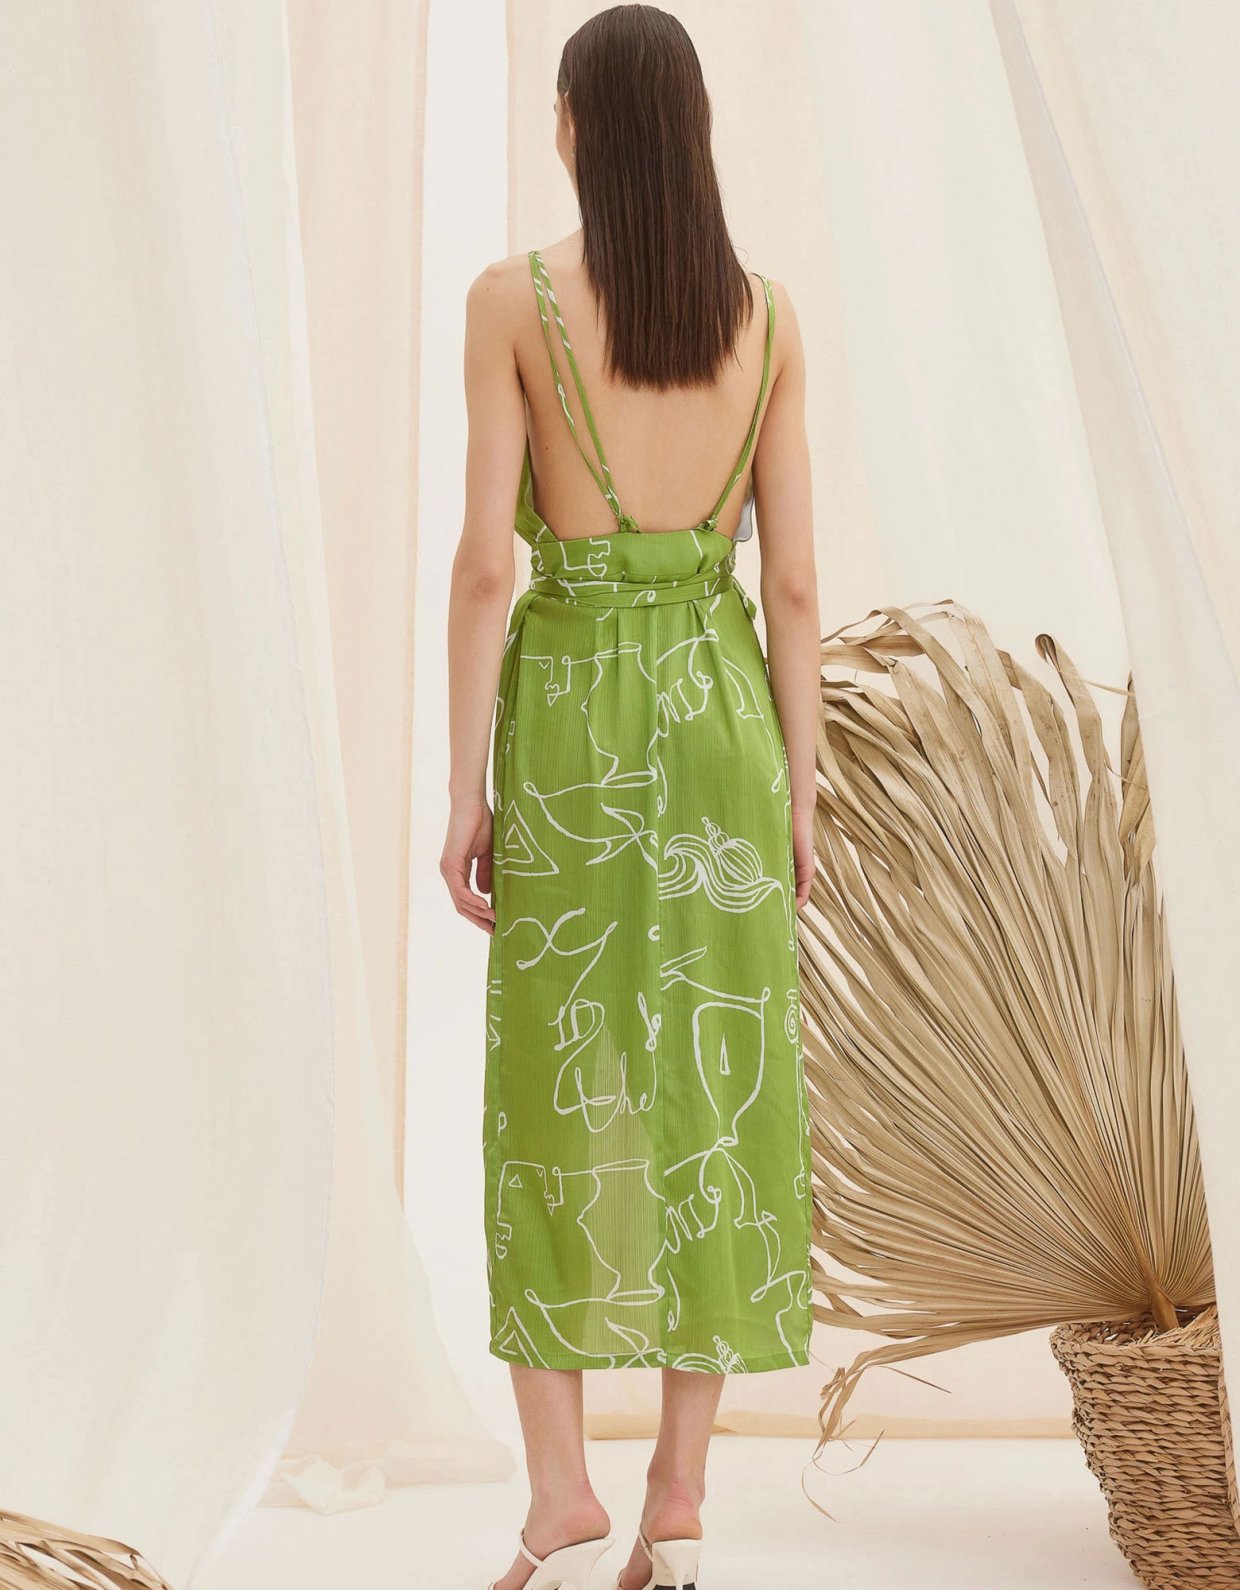 The Knl's Andromeda wrap lime line dress